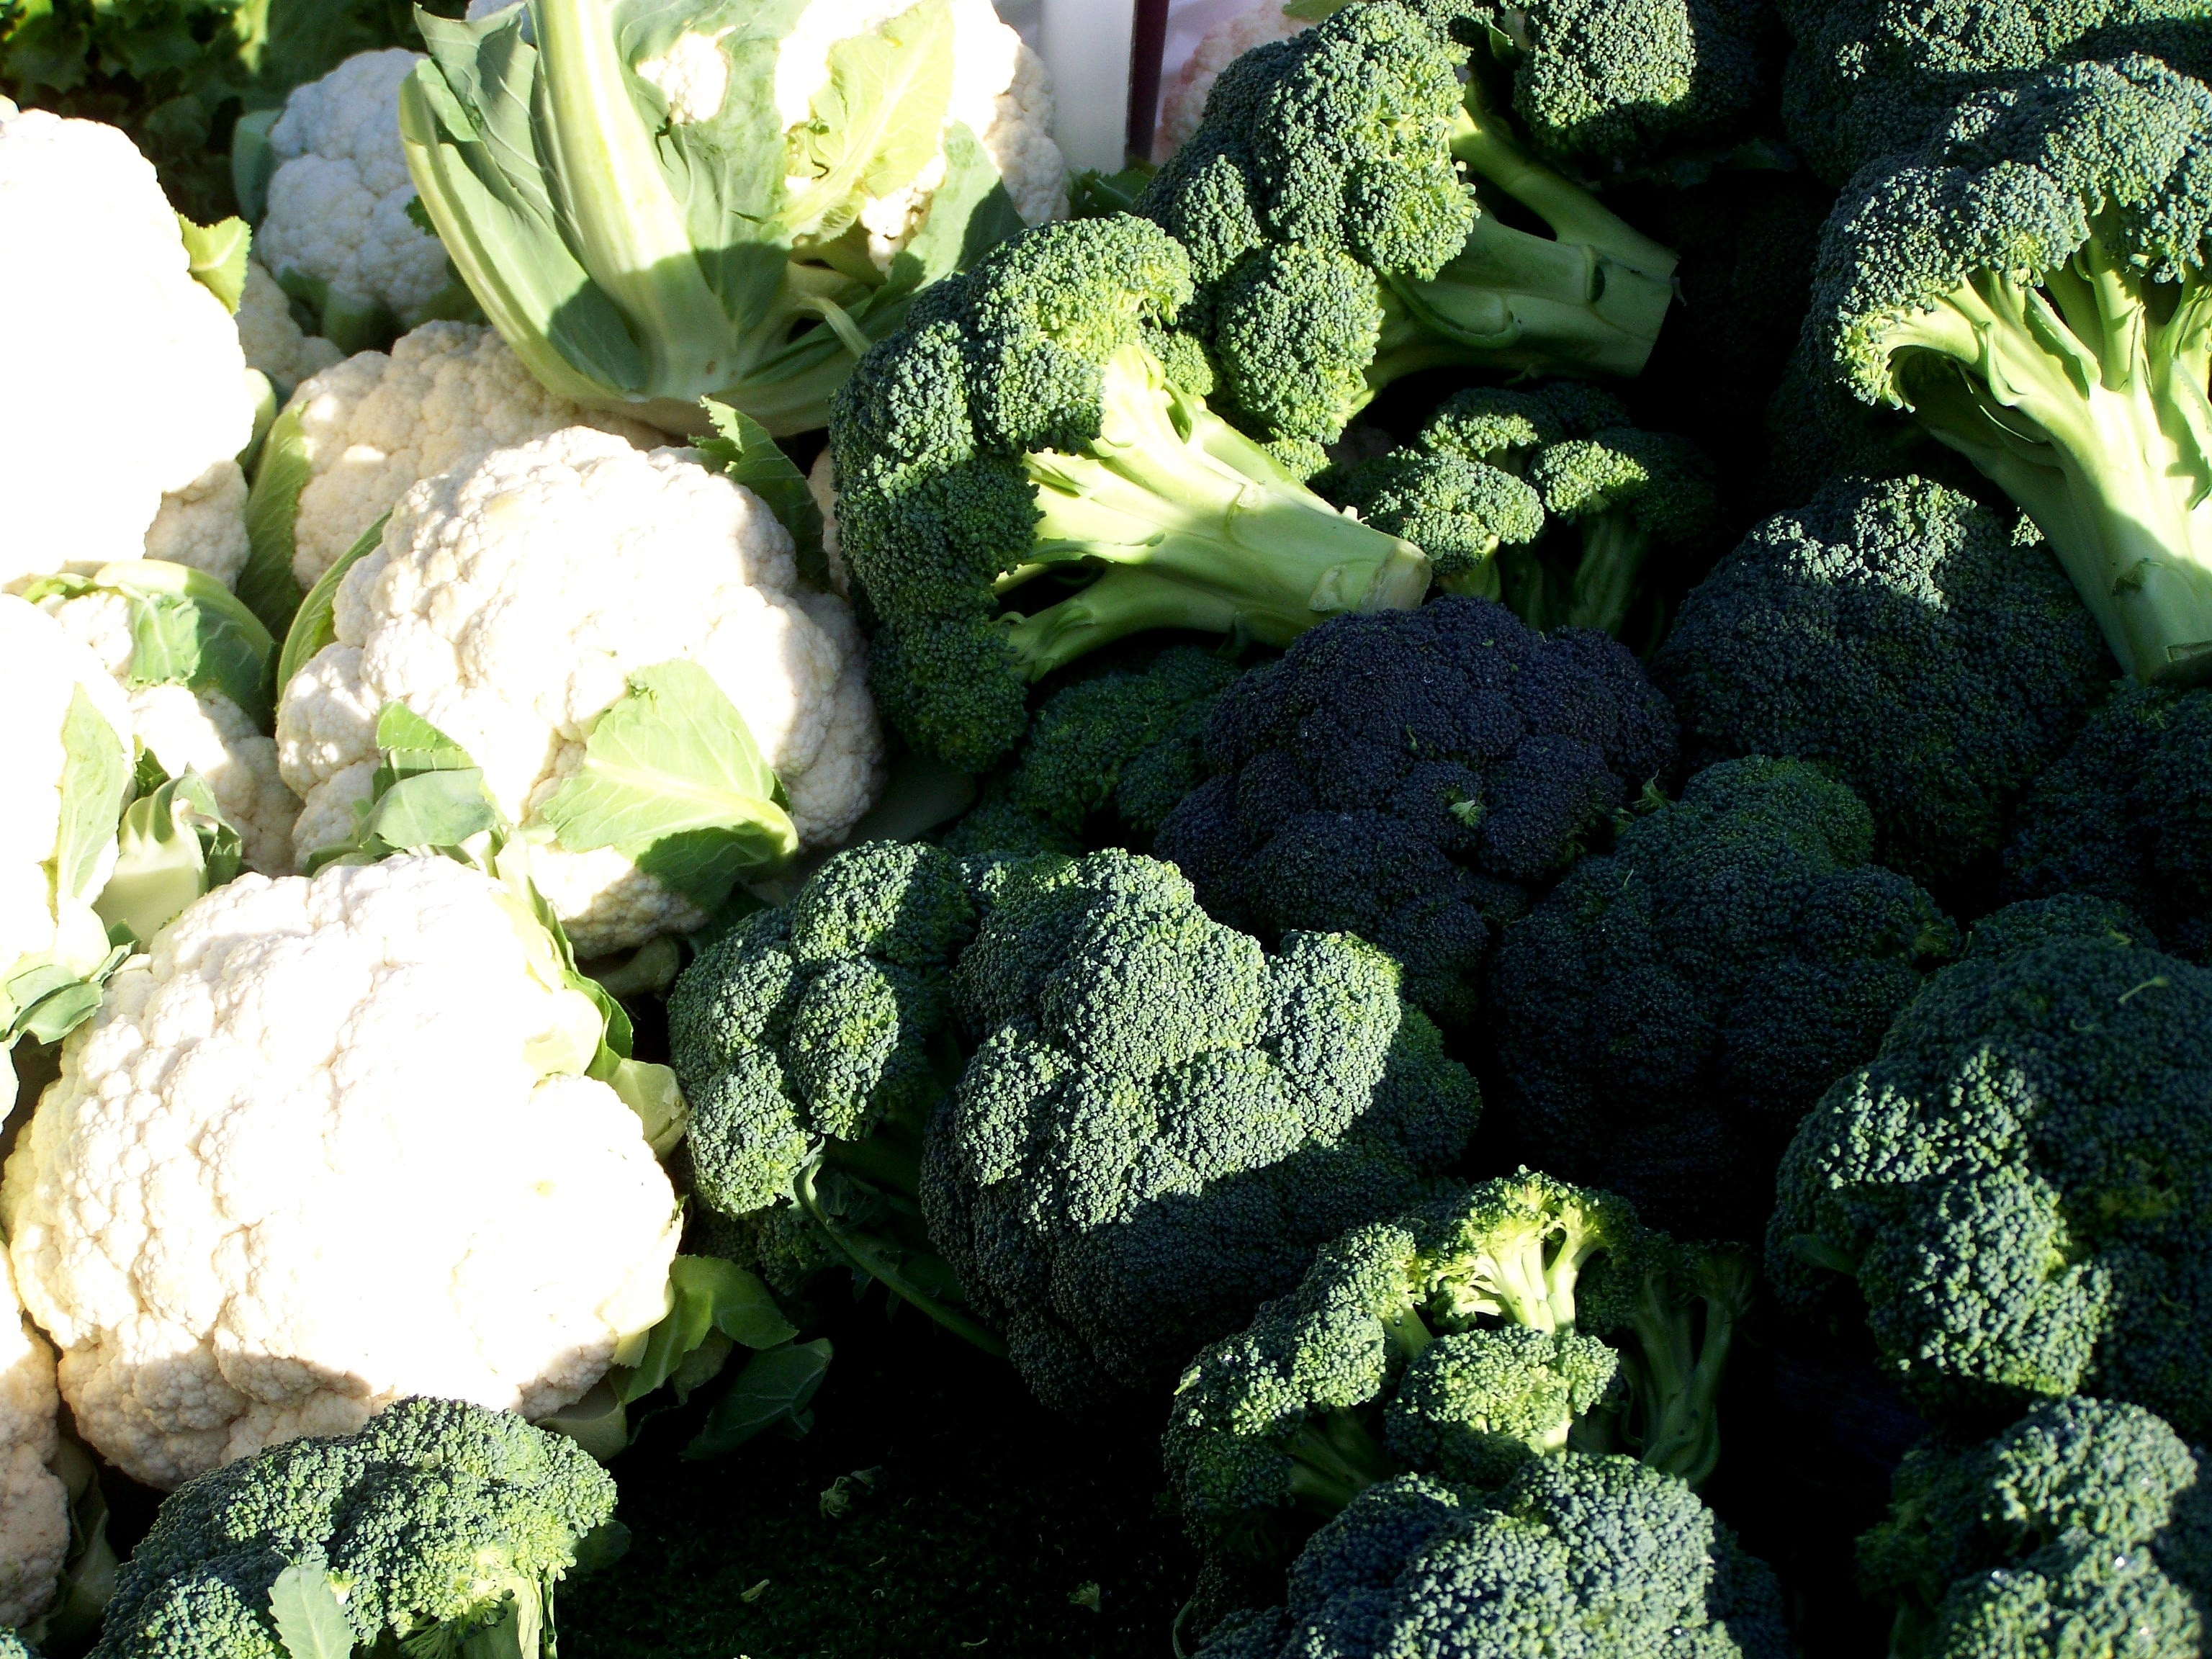 green and white broccoli and cauliflower lot